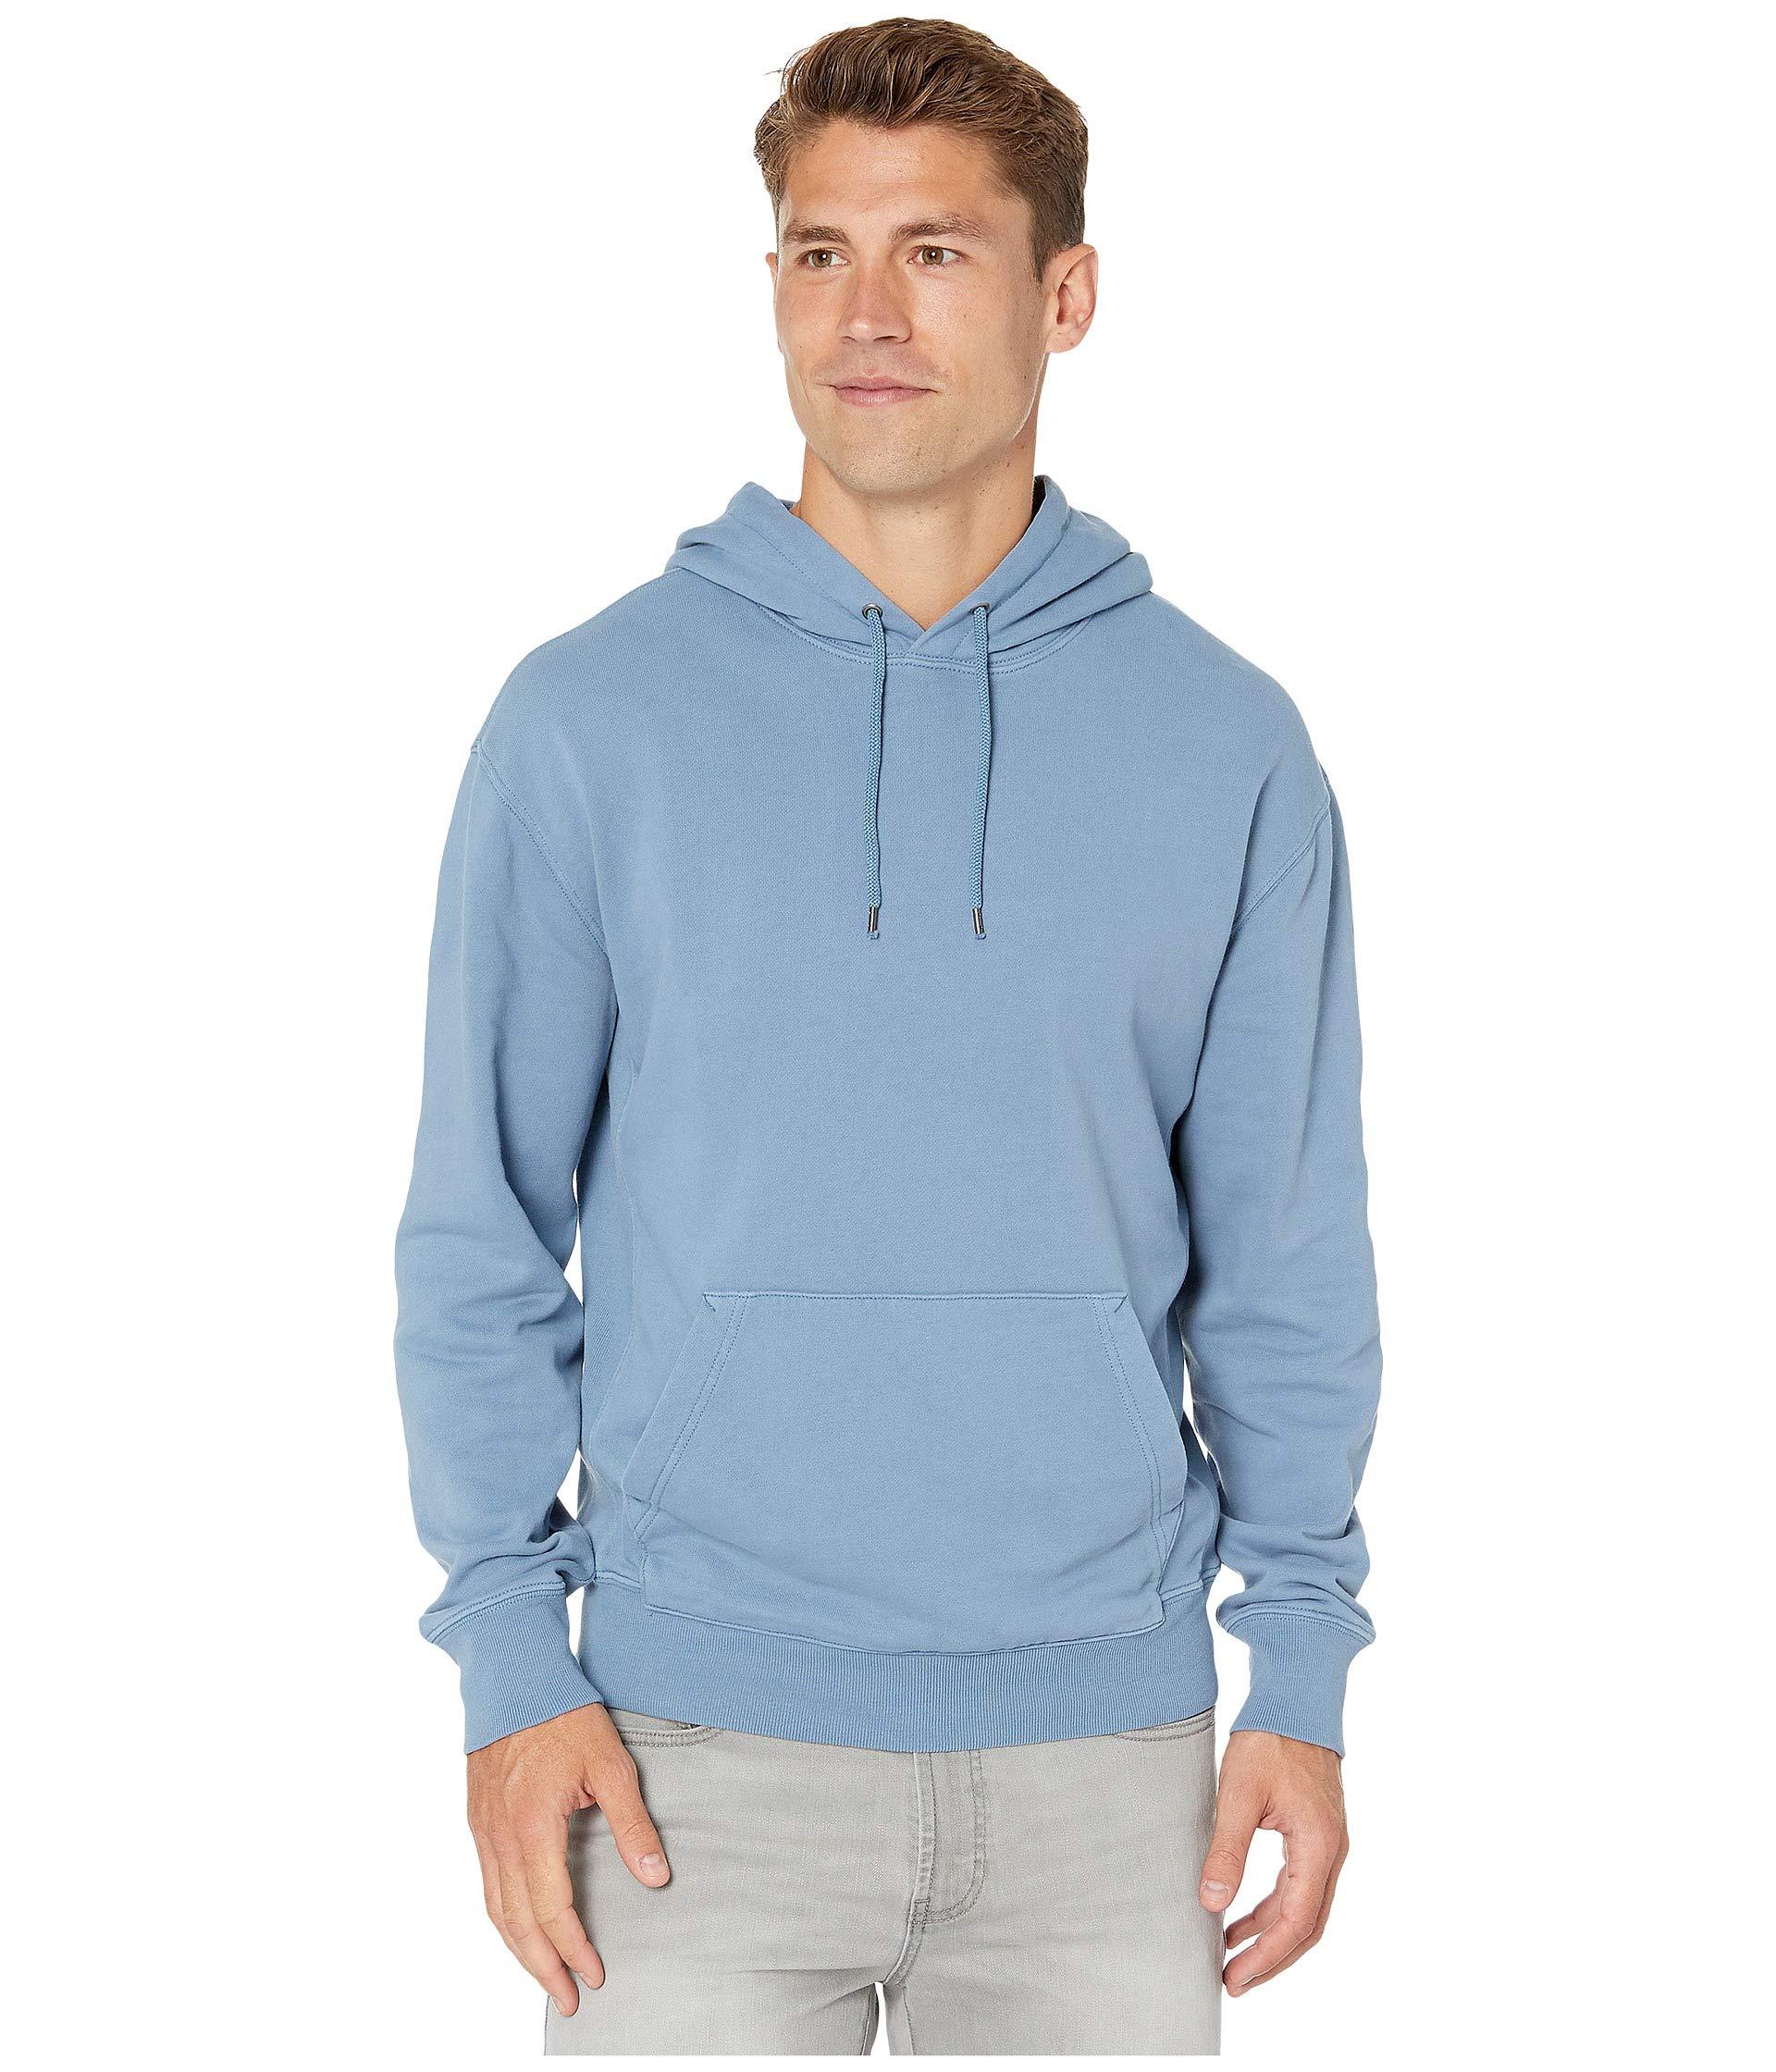 J.Crew Cotton Garment-dyed French Terry Hoodie in Blue for Men - Lyst